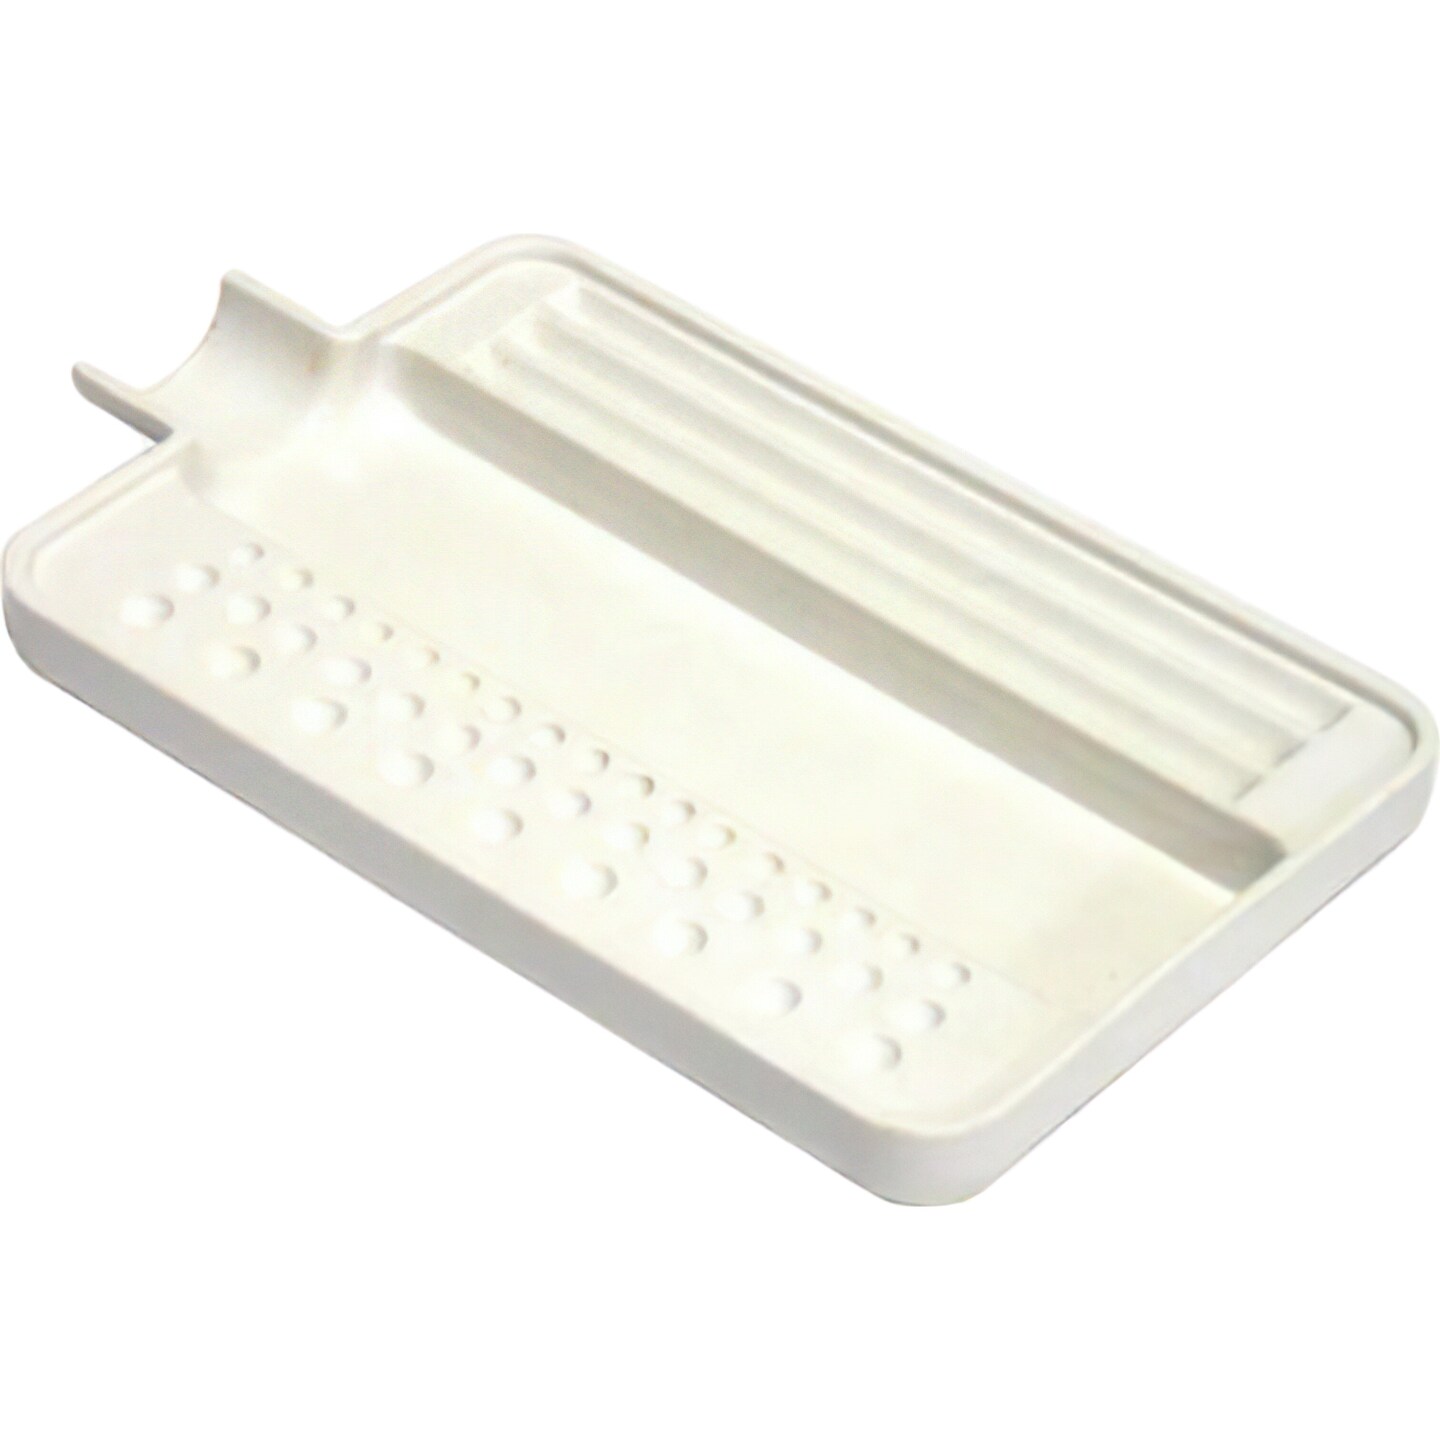 Bead Sorting Tray, White, 4-1/2 by 2-1/2 Inches | TRA-120.02